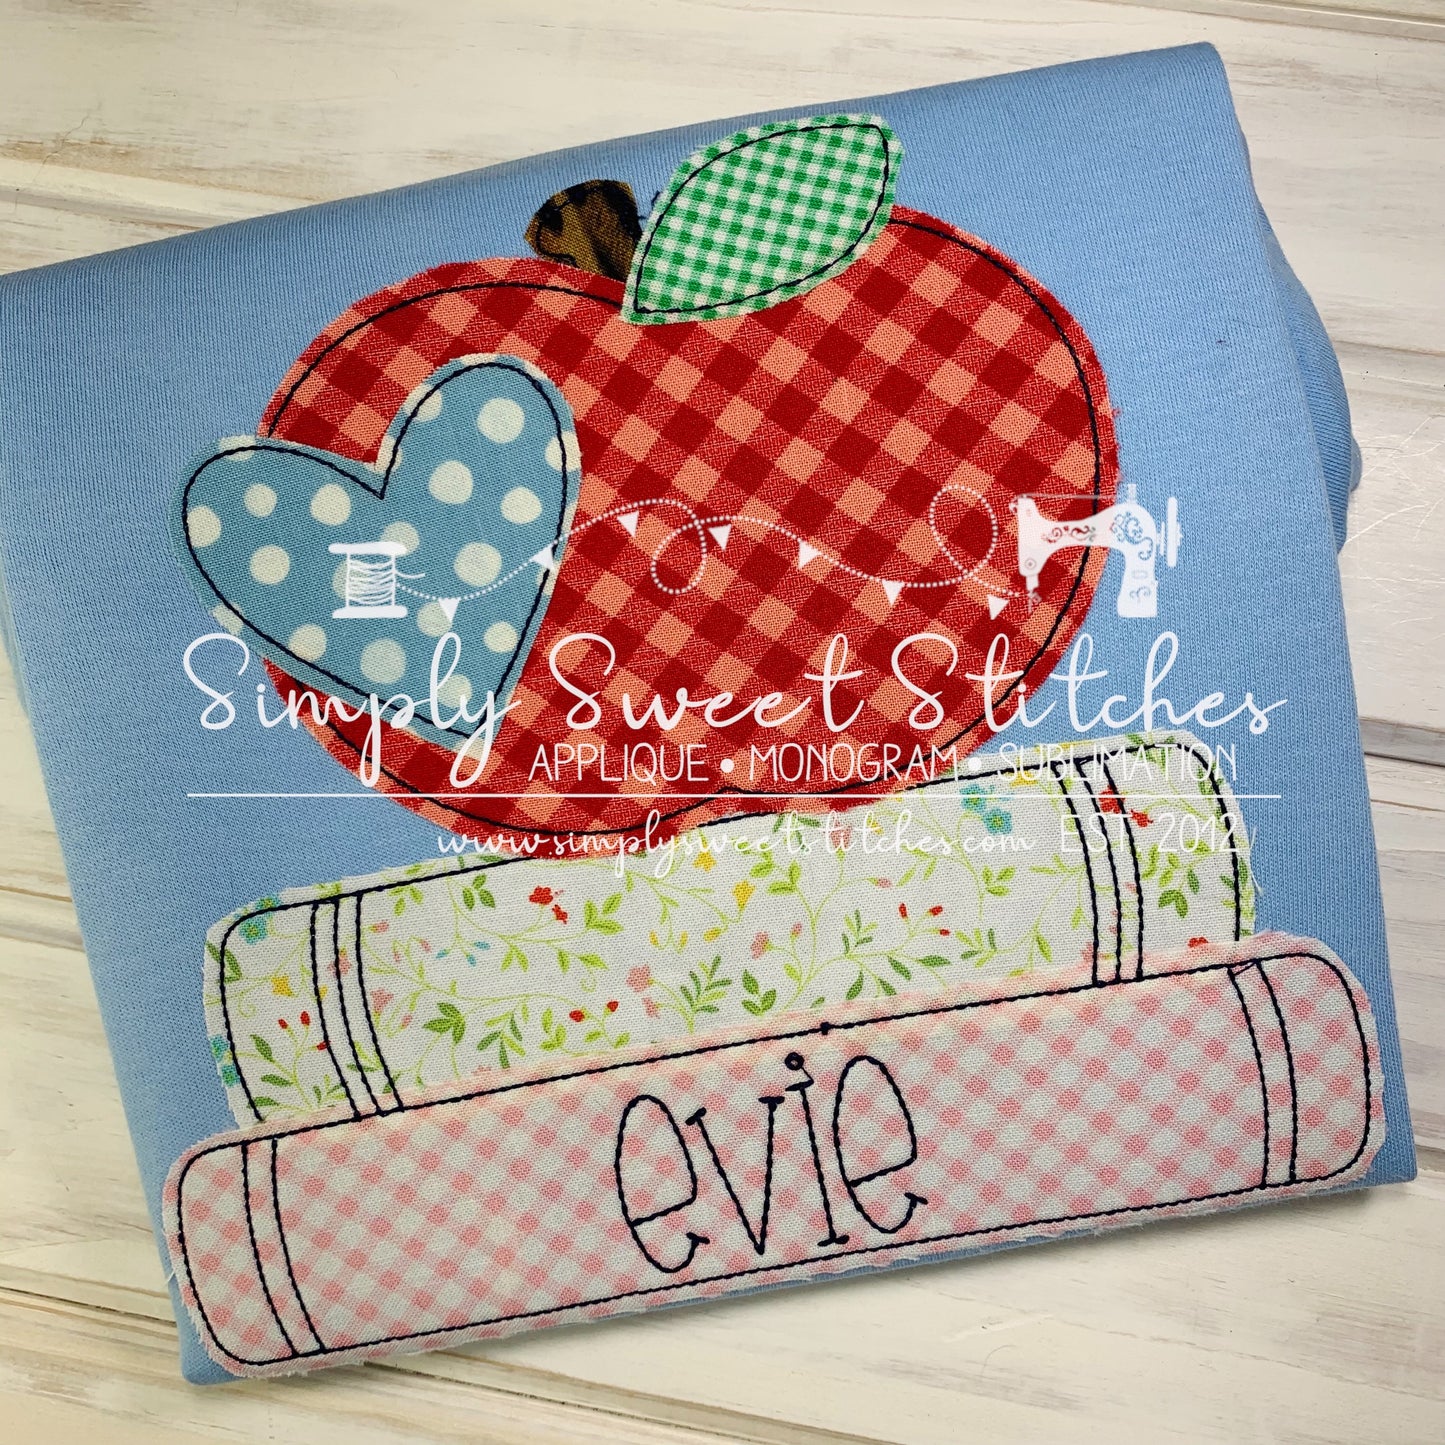 2555 - APPLE WITH HEART STACKED BOOKS - CHILD SHIRT